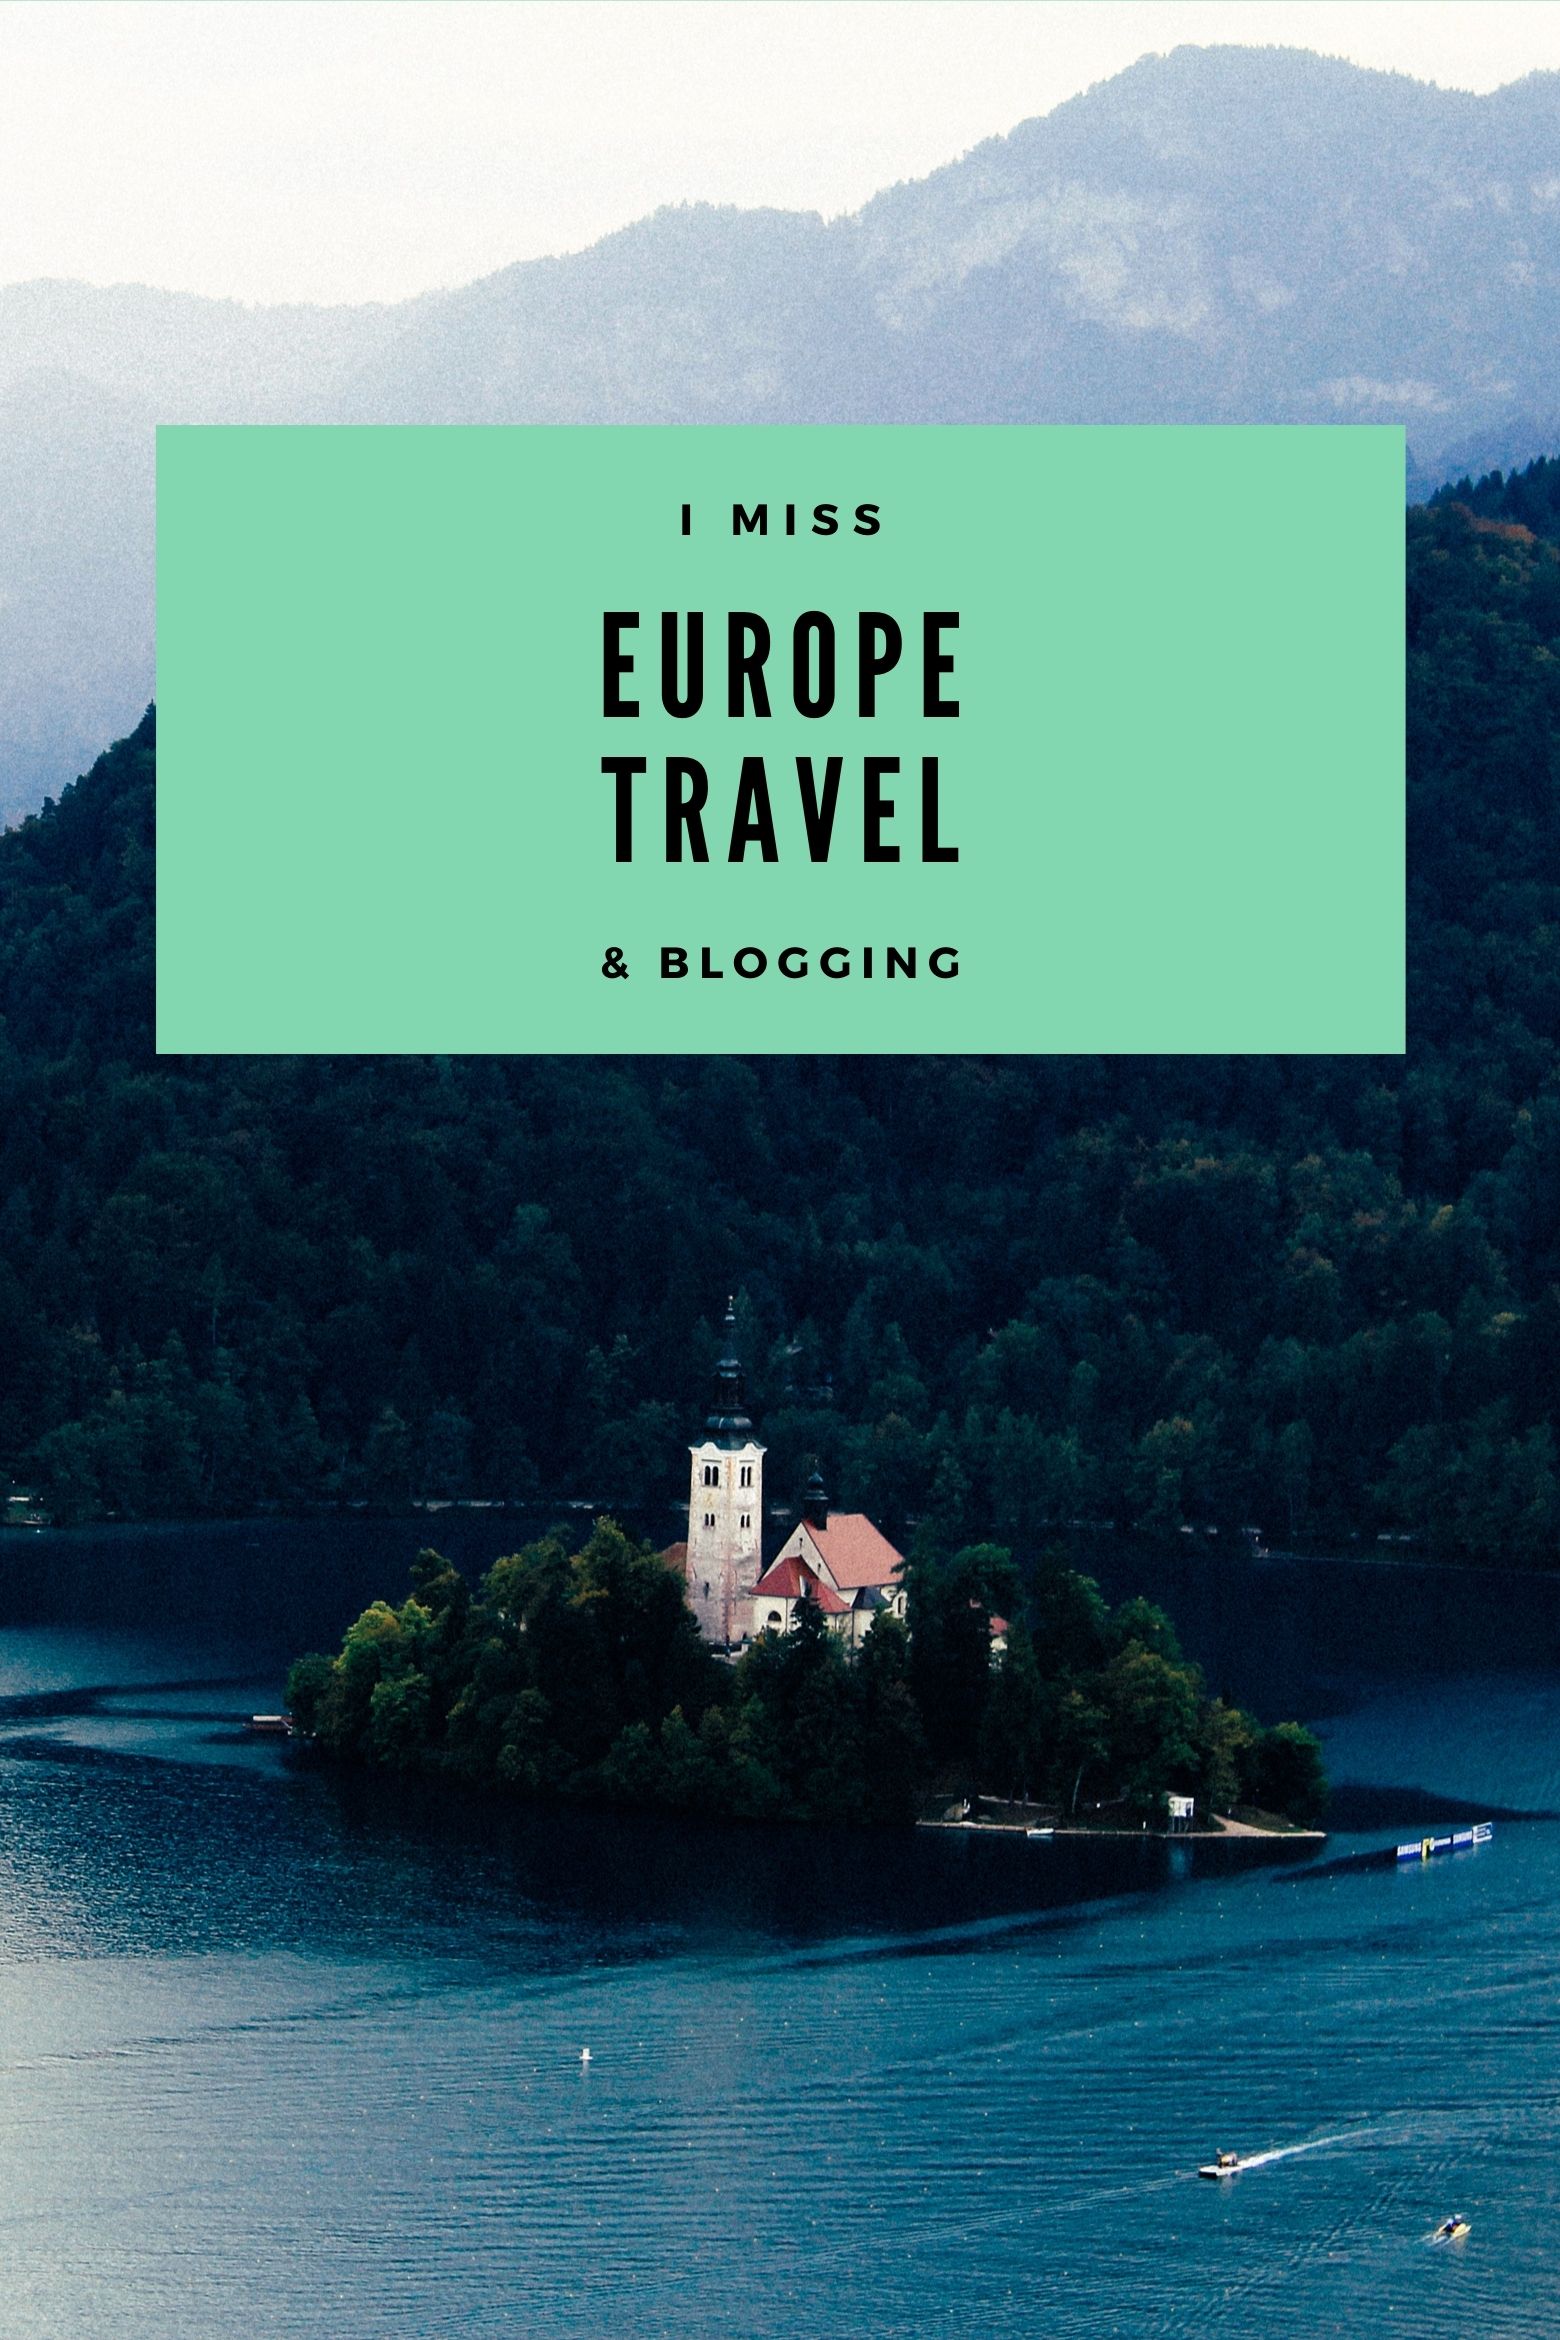 I miss Europe, travel and blogging